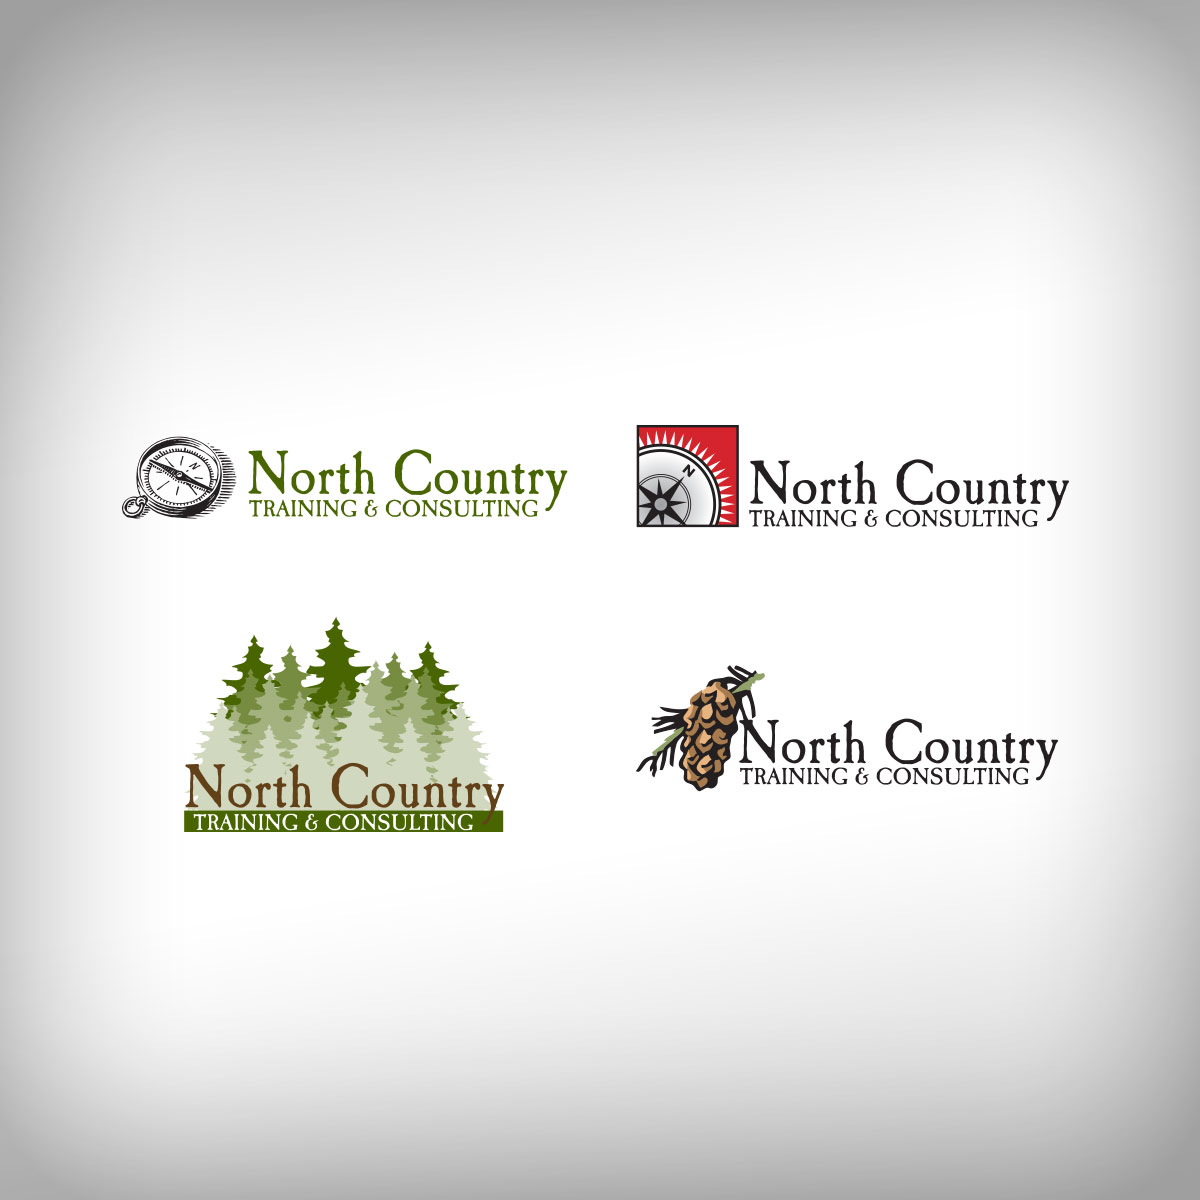 North Country Logo Ideas